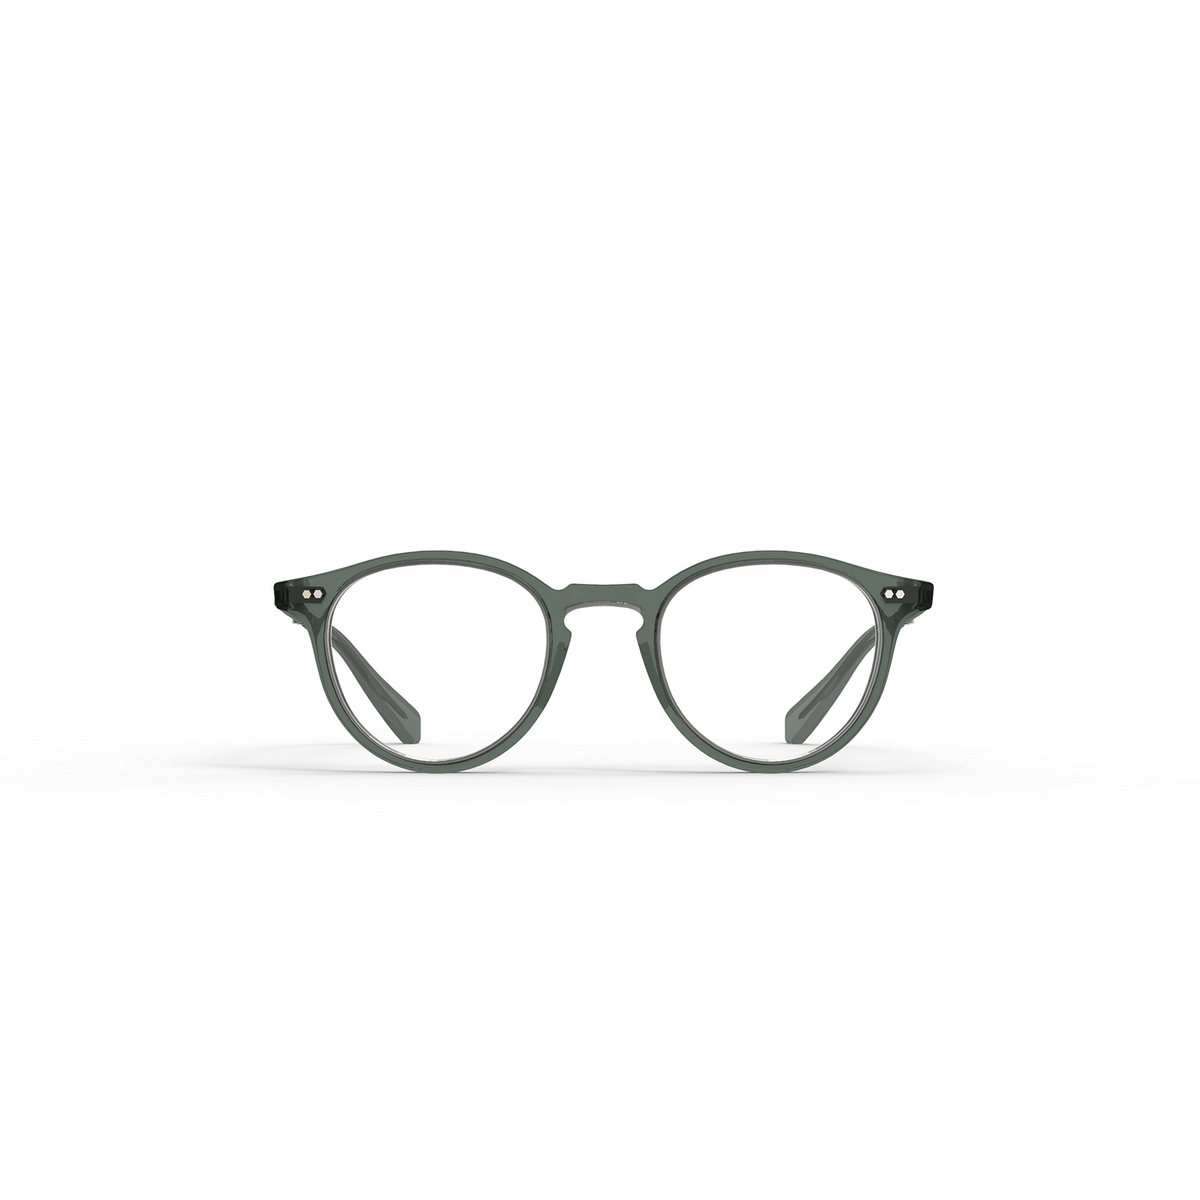 Mr. Leight® Round Eyeglasses: Marmont Ii C color Grey Sage-pewter Grys-pw - front view.